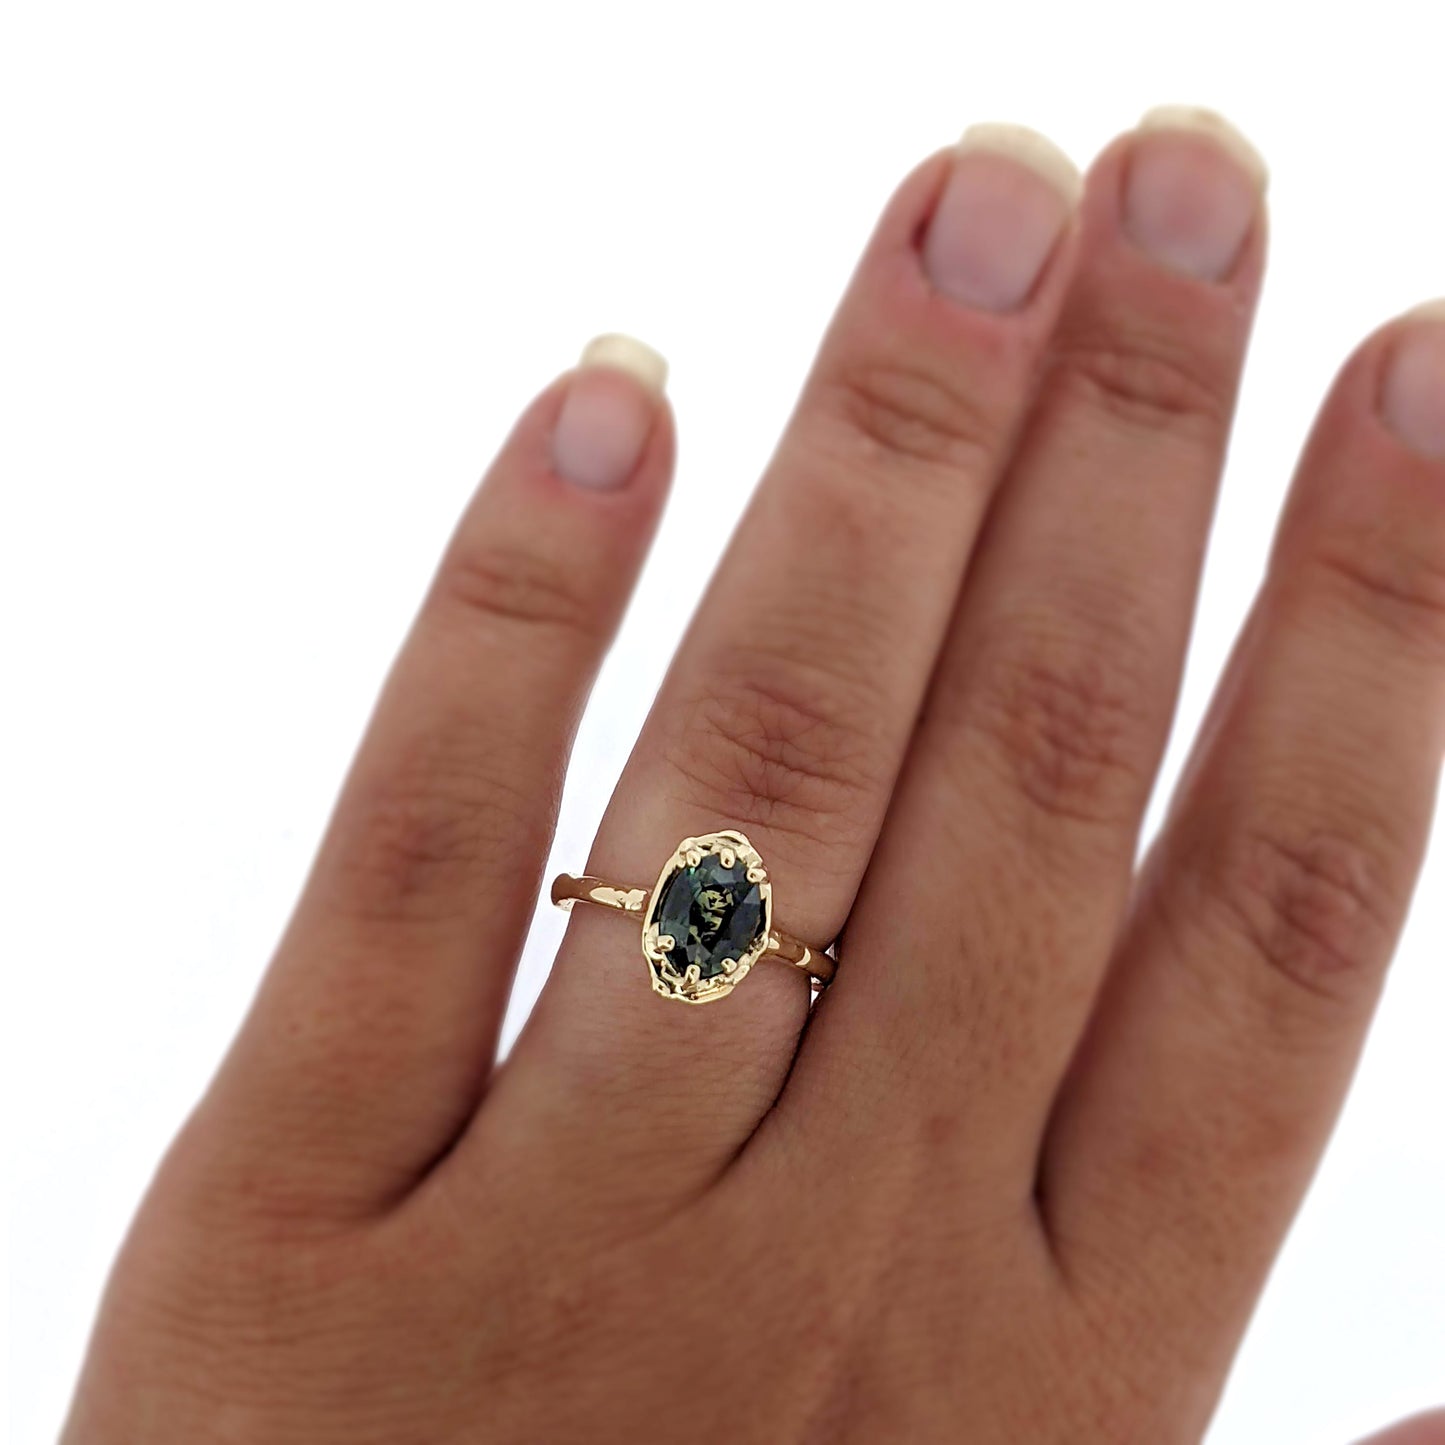 Full view of Rianna Ring on woman's hand to help give an idea of its scale.